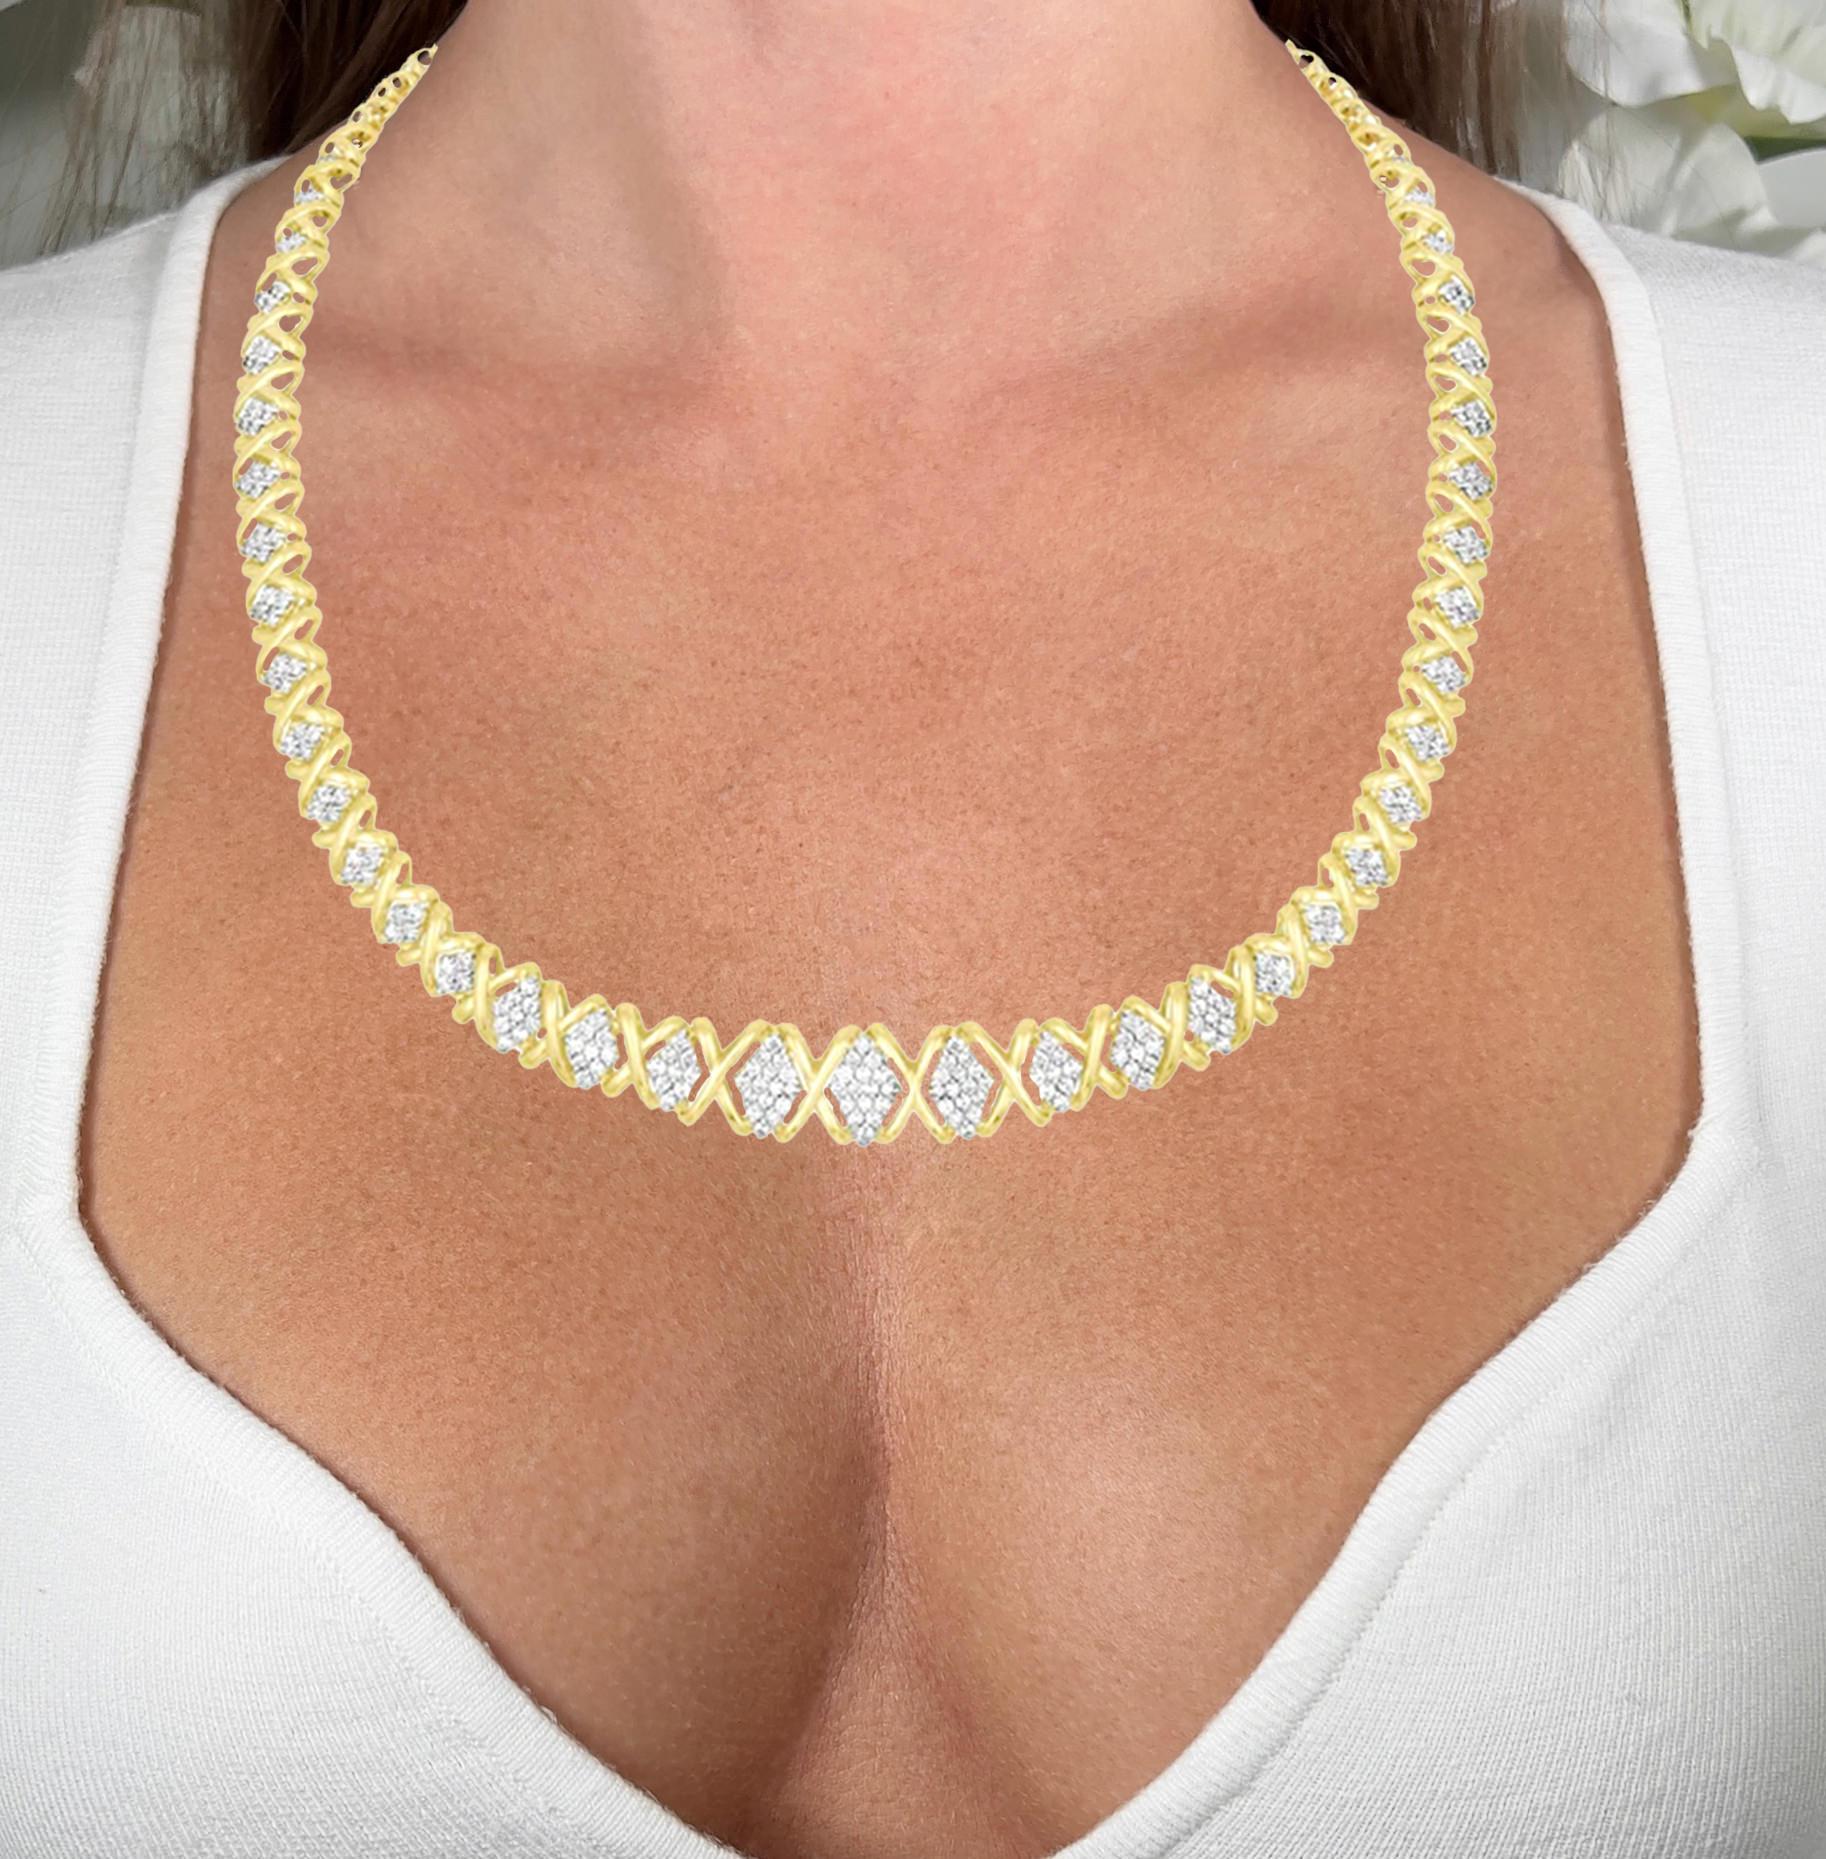 It comes with the Gemological Appraisal by GIA GG/AJP
All Gemstones are Natural
198 Diamonds = 4.15 Carats
Cut: Round Brilliant
Metal: 10K Yellow Gold
Length: 18 Inches
Width: 0.2 Inches